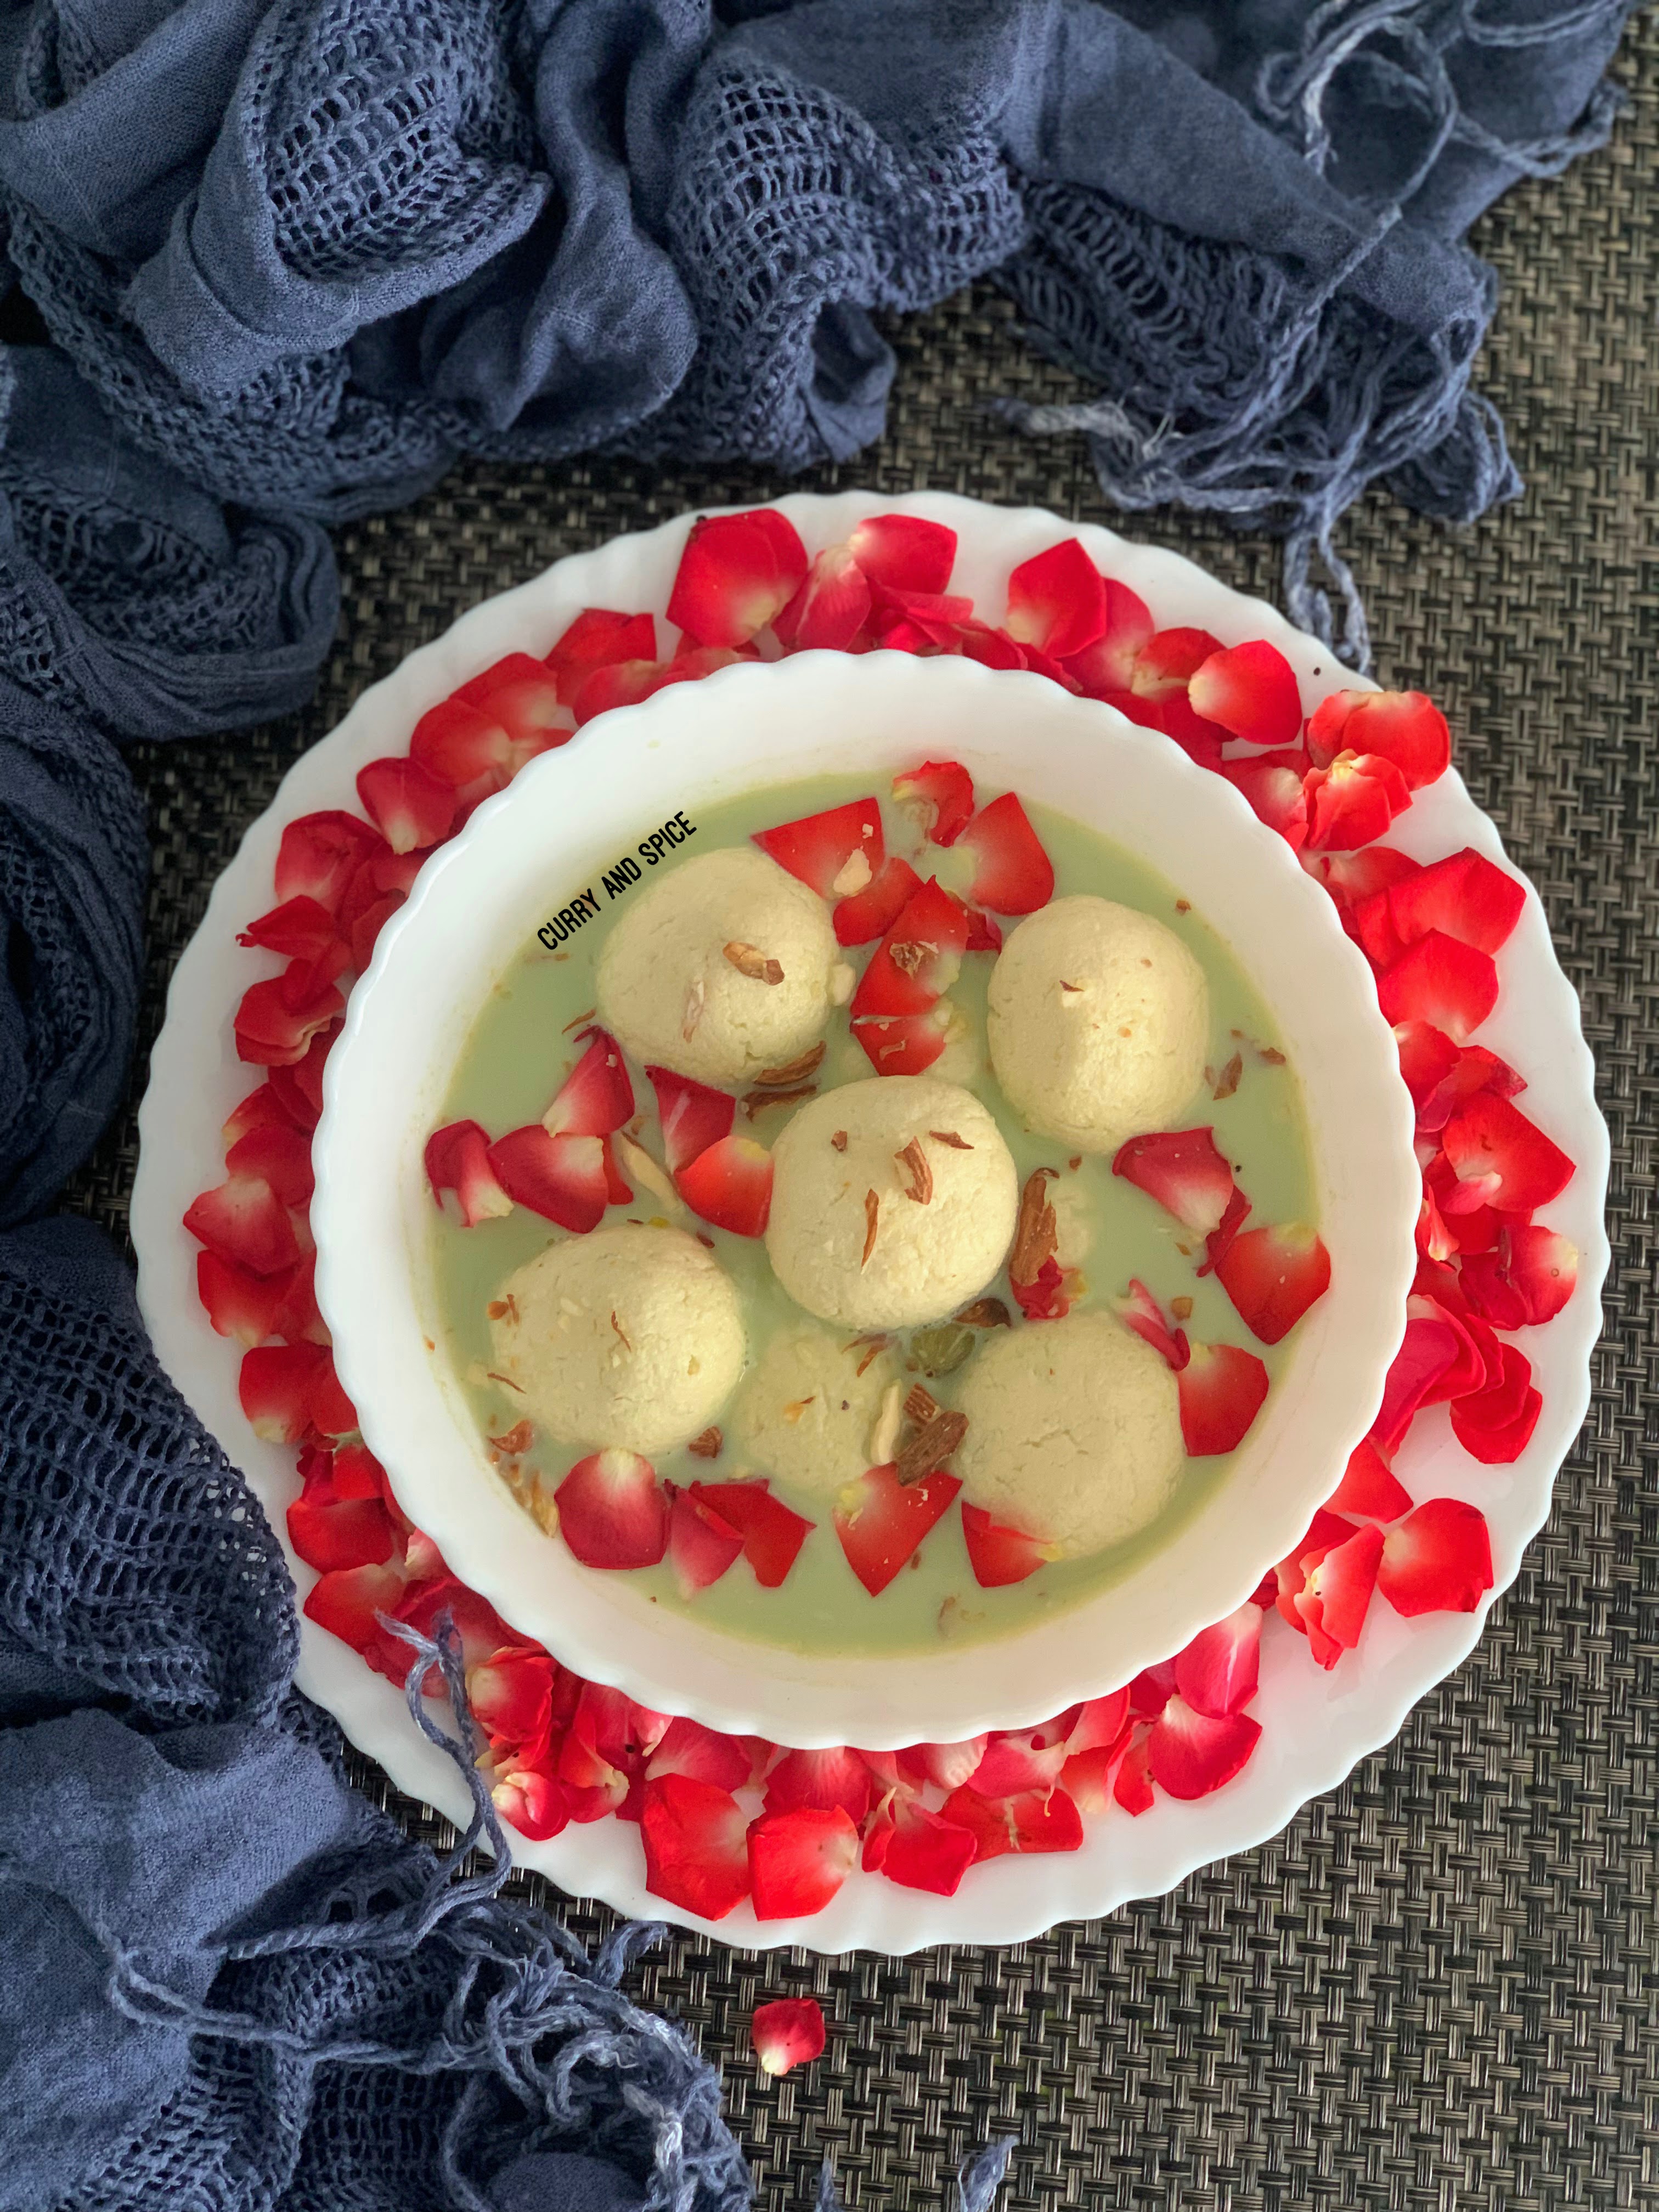 CURRY AND SPICE: PAN FLAVOURED RASMALAI